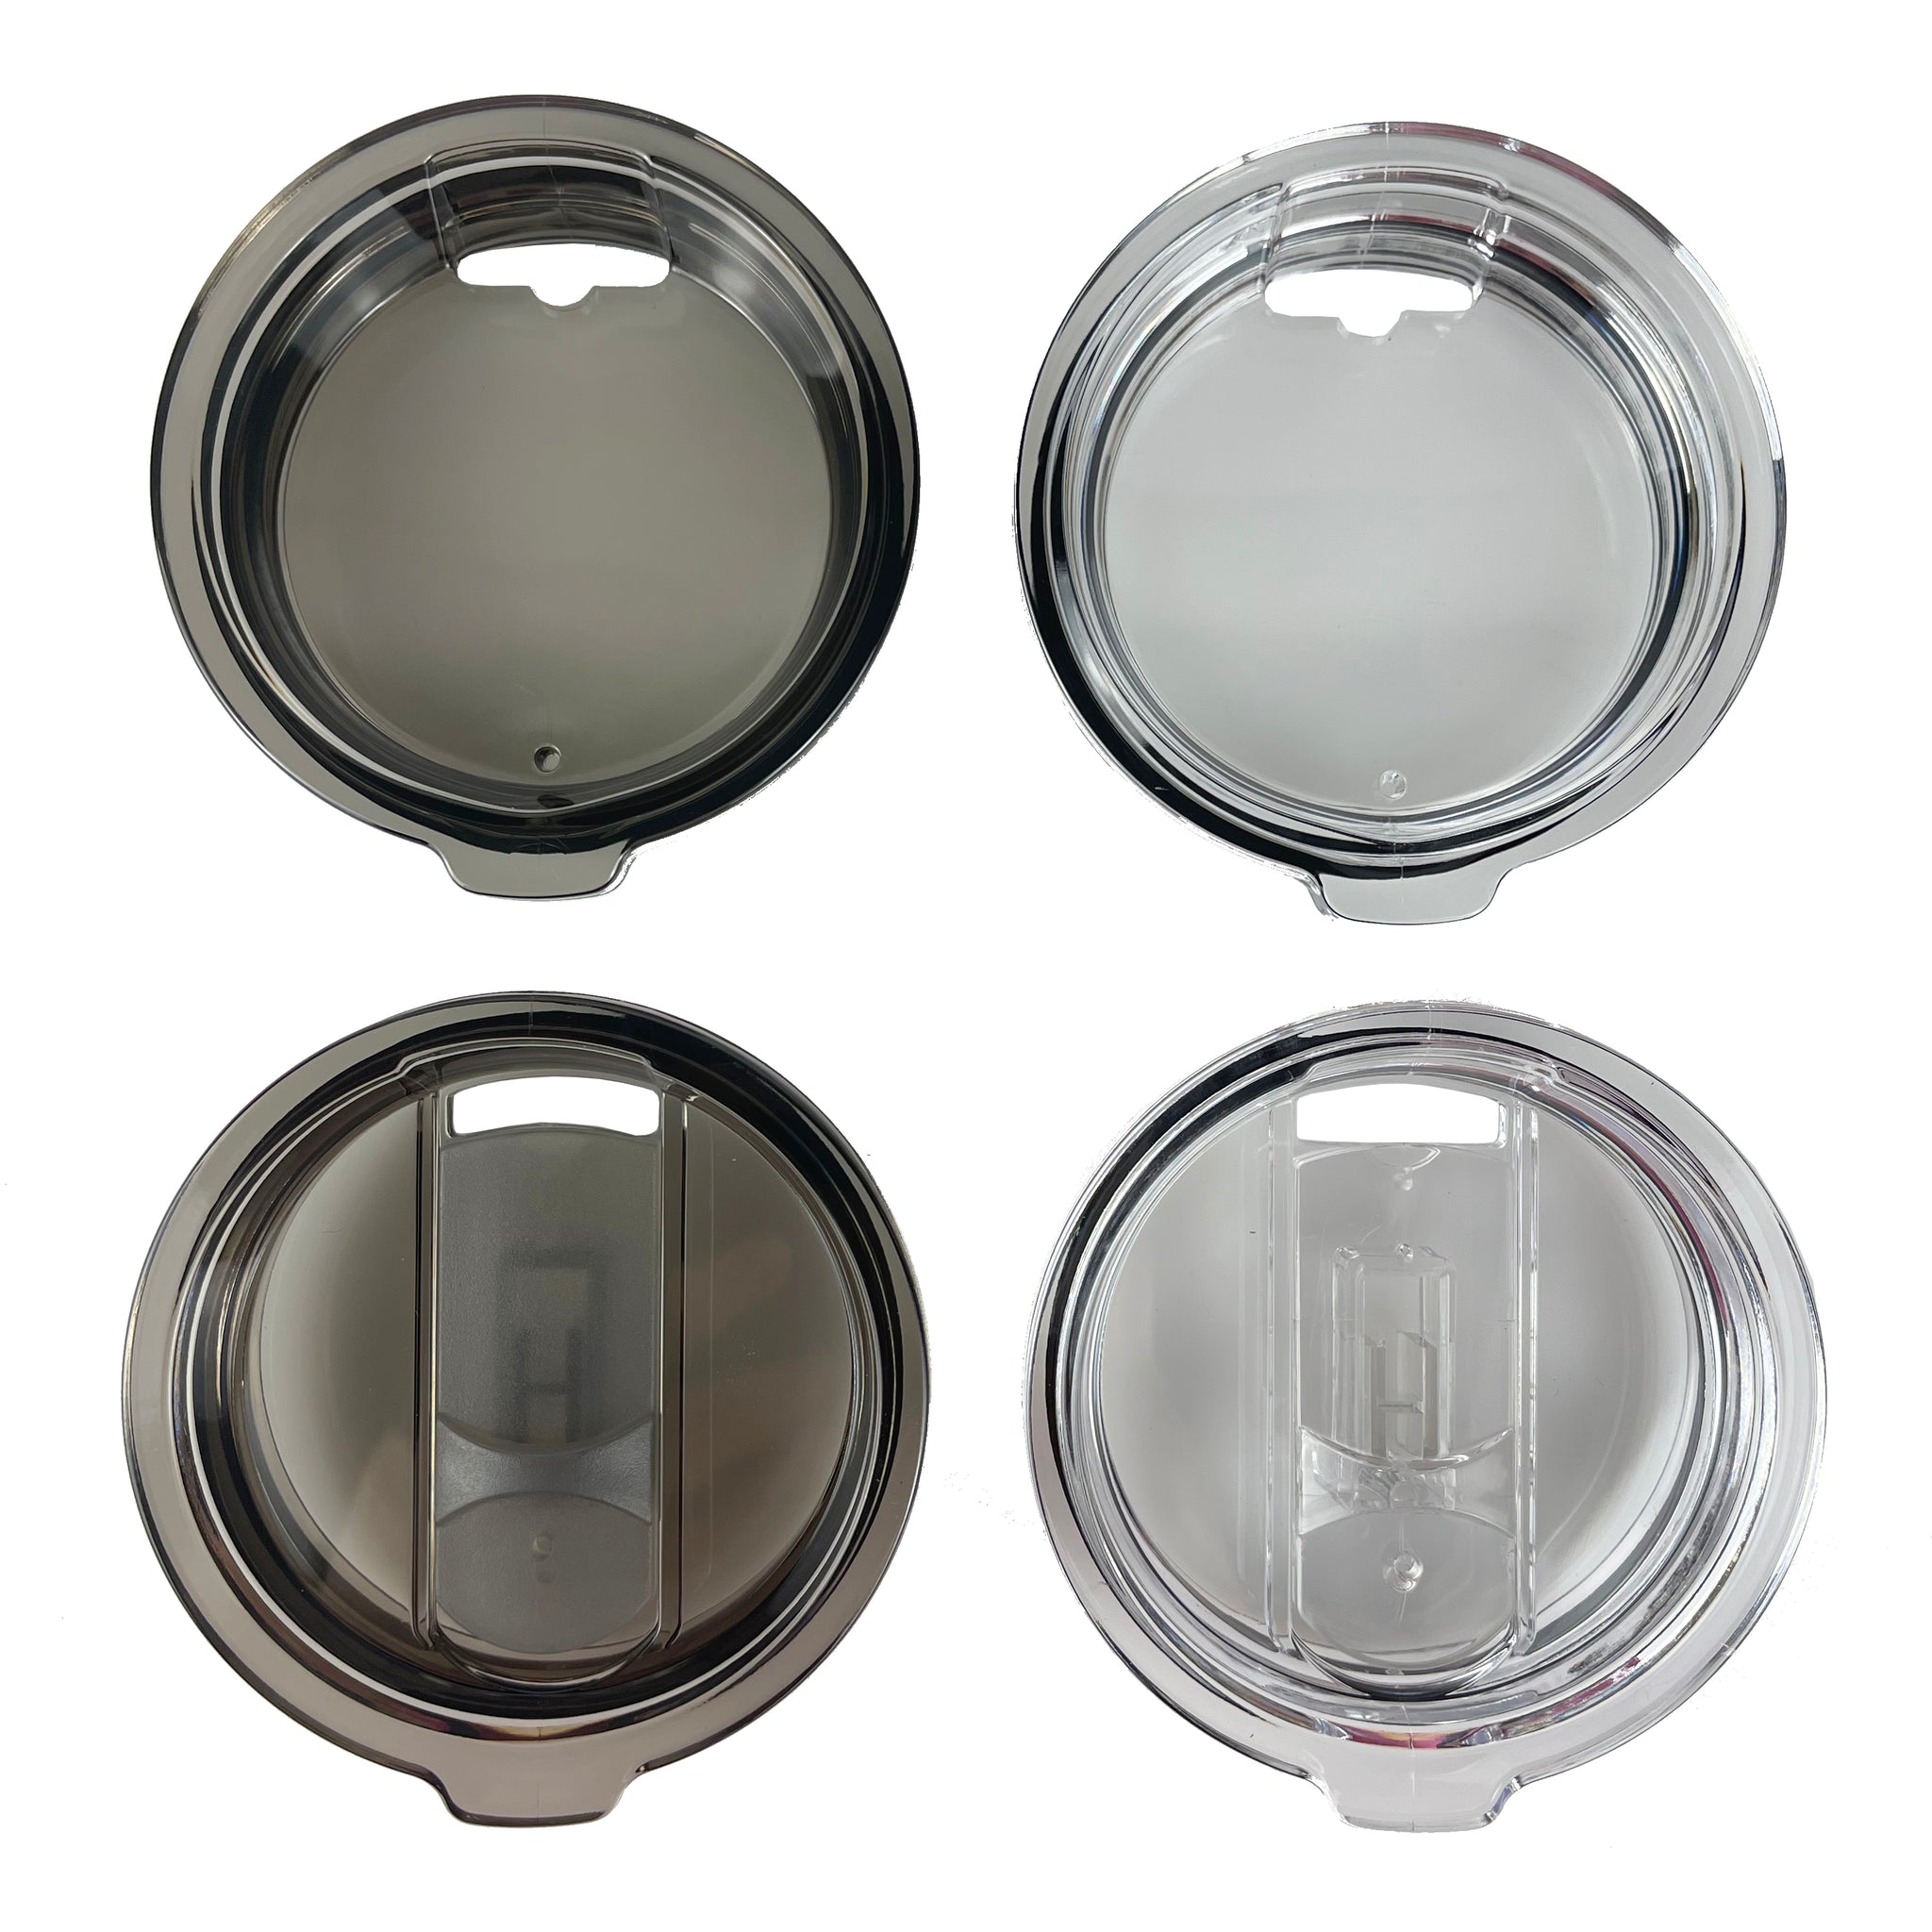 Tumbler Lid Replacements